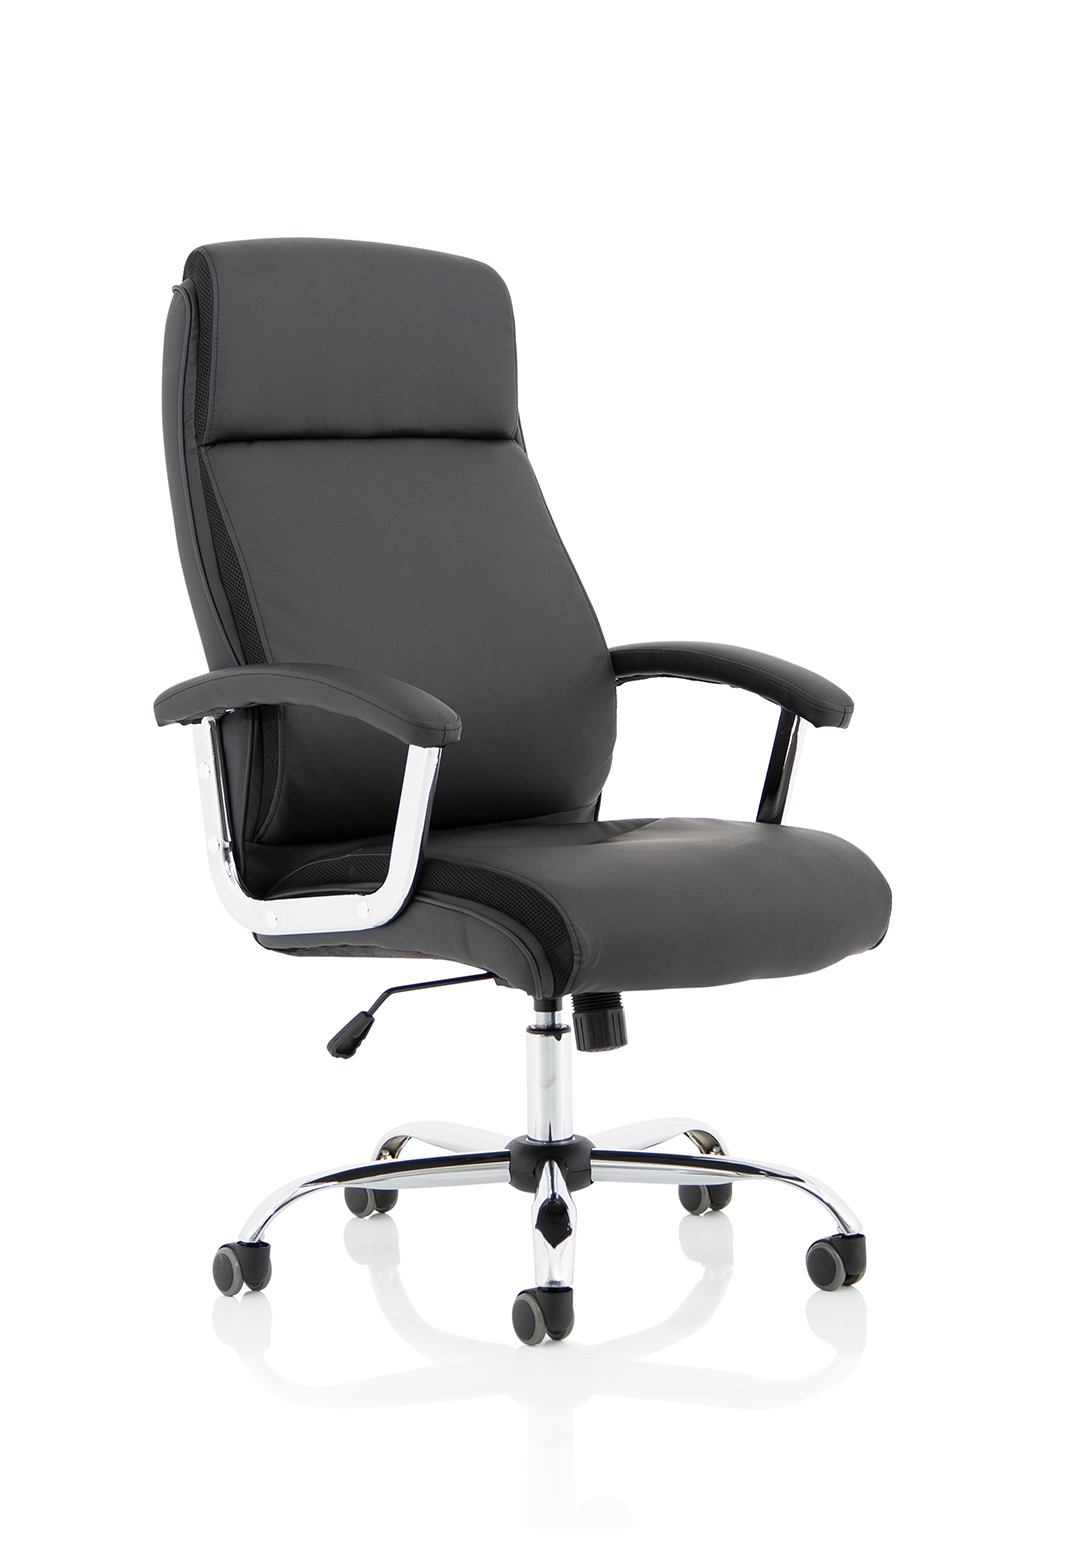 Hatley Black Bonded Leather Executive Chair